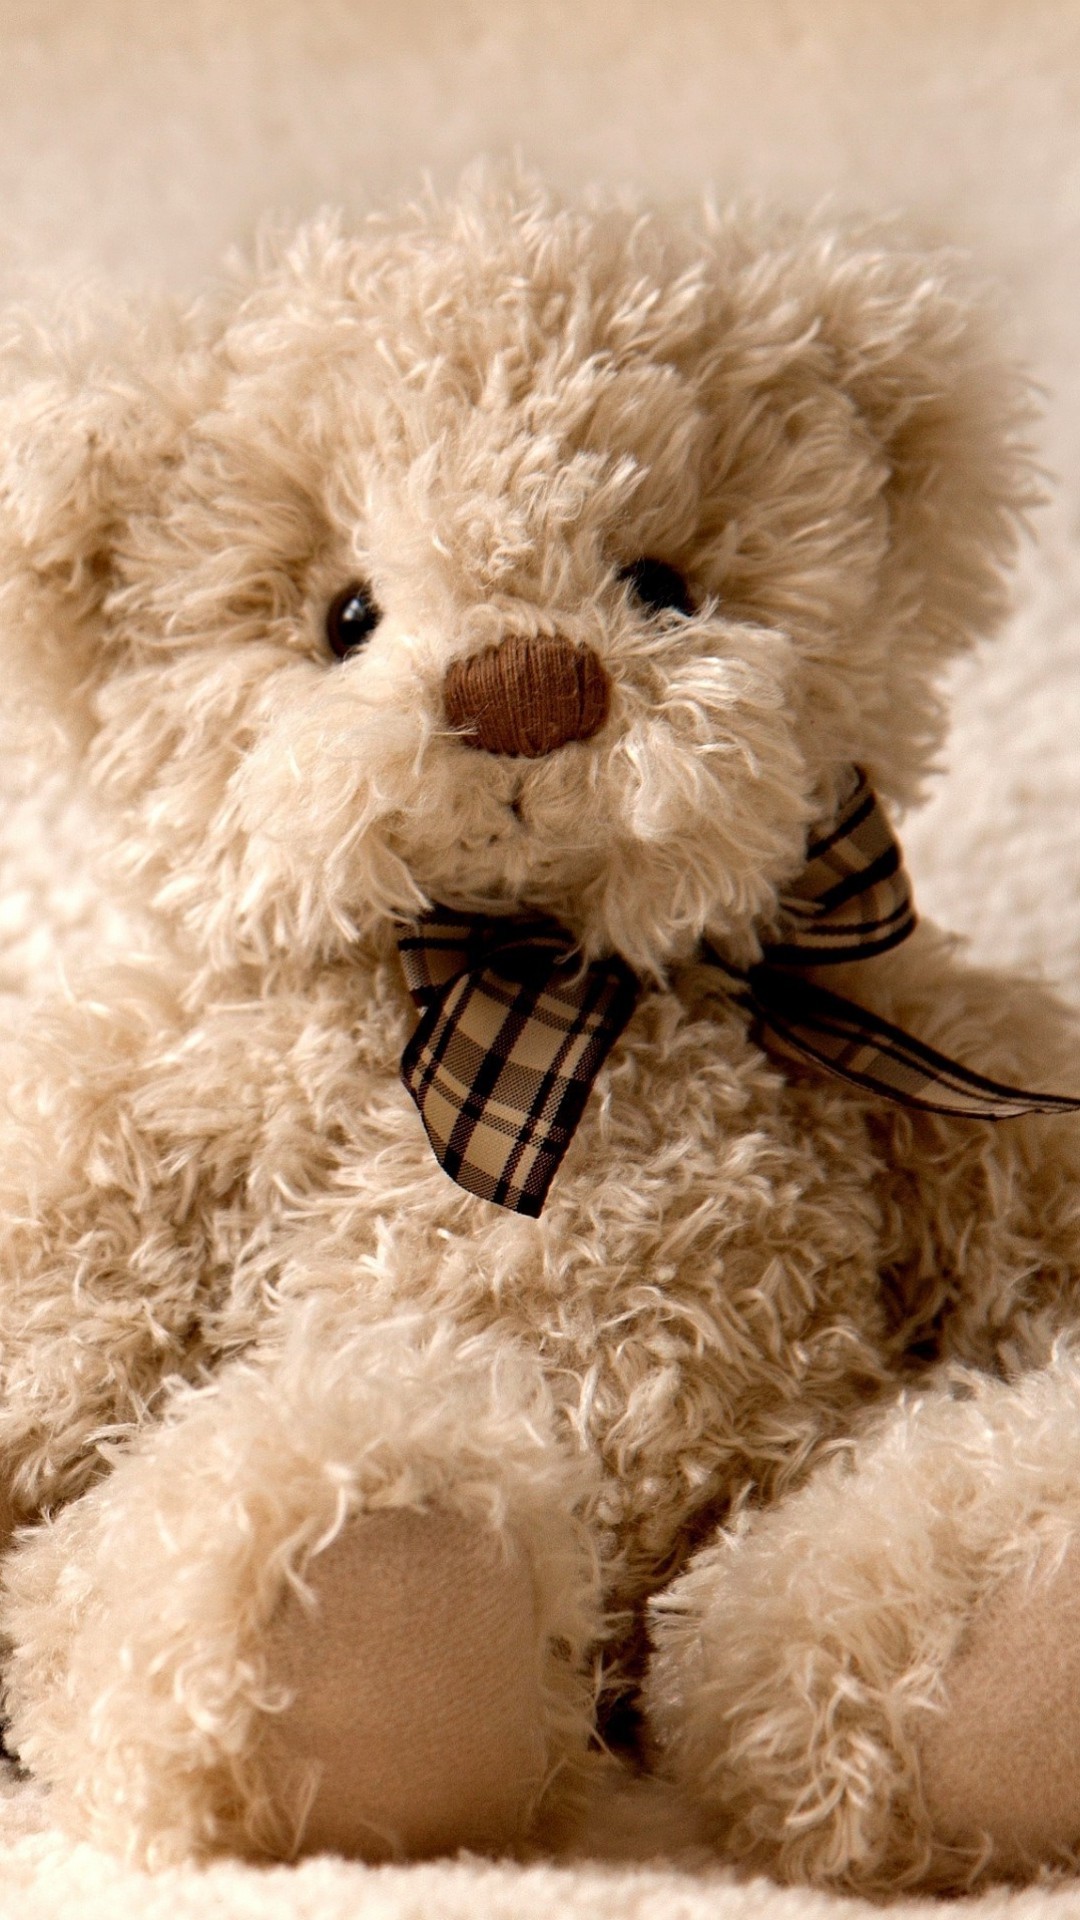 1080x1920 Get free high quality HD wallpapers wallpaper iphone teddy bear